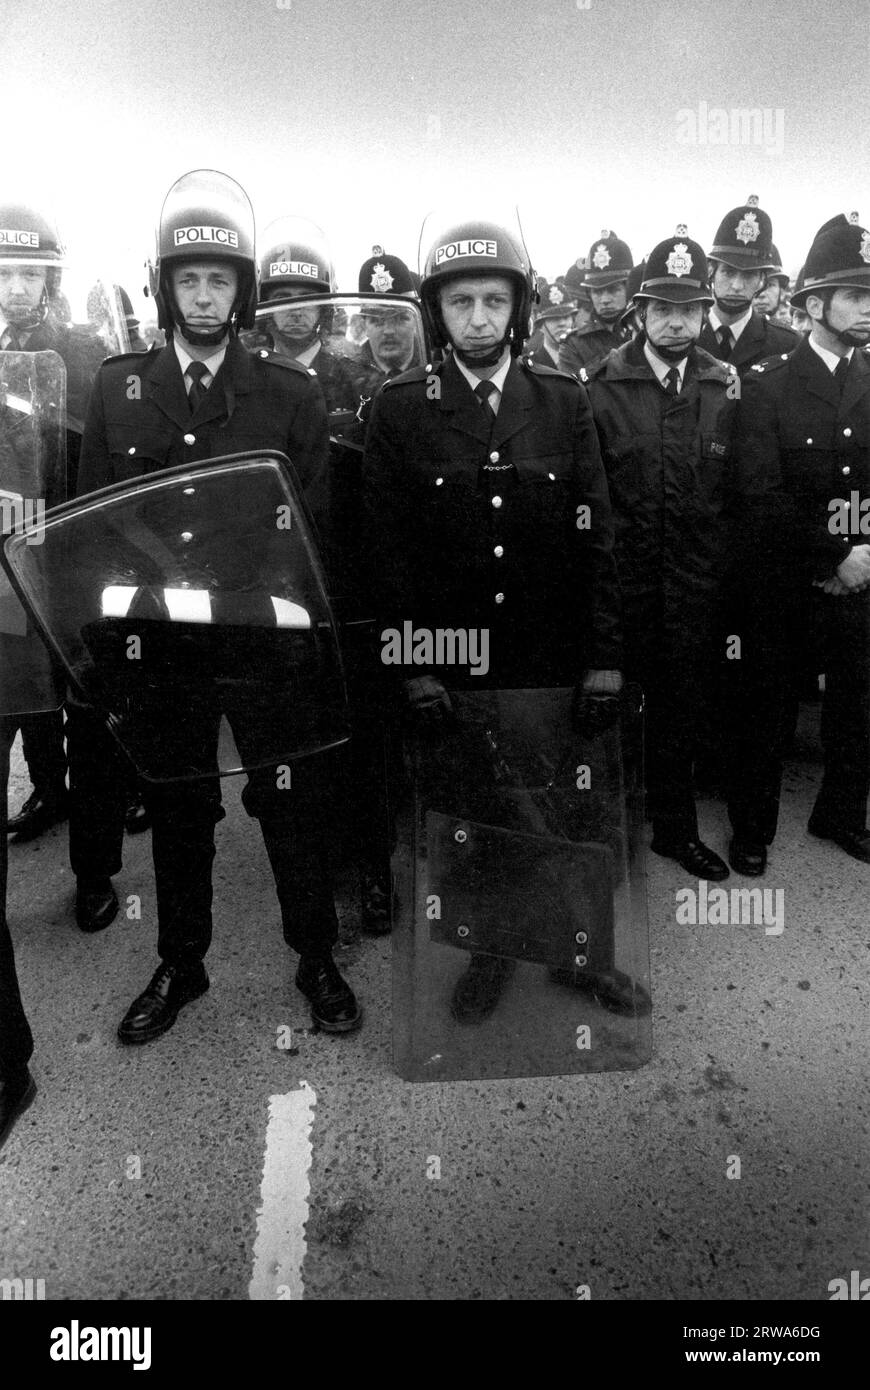 Police reinforcements during the Miners Strike 1984 at Gascoigne Wood drift mine Yorkshire, England. The police are waiting for the so called Scabs - working coal miners to arrive by coach and be bused into work through a picket line of striking coal miners who are on strike. Yorkshire's Selby Coalfield 1980s UK HOMER SYKES Stock Photo